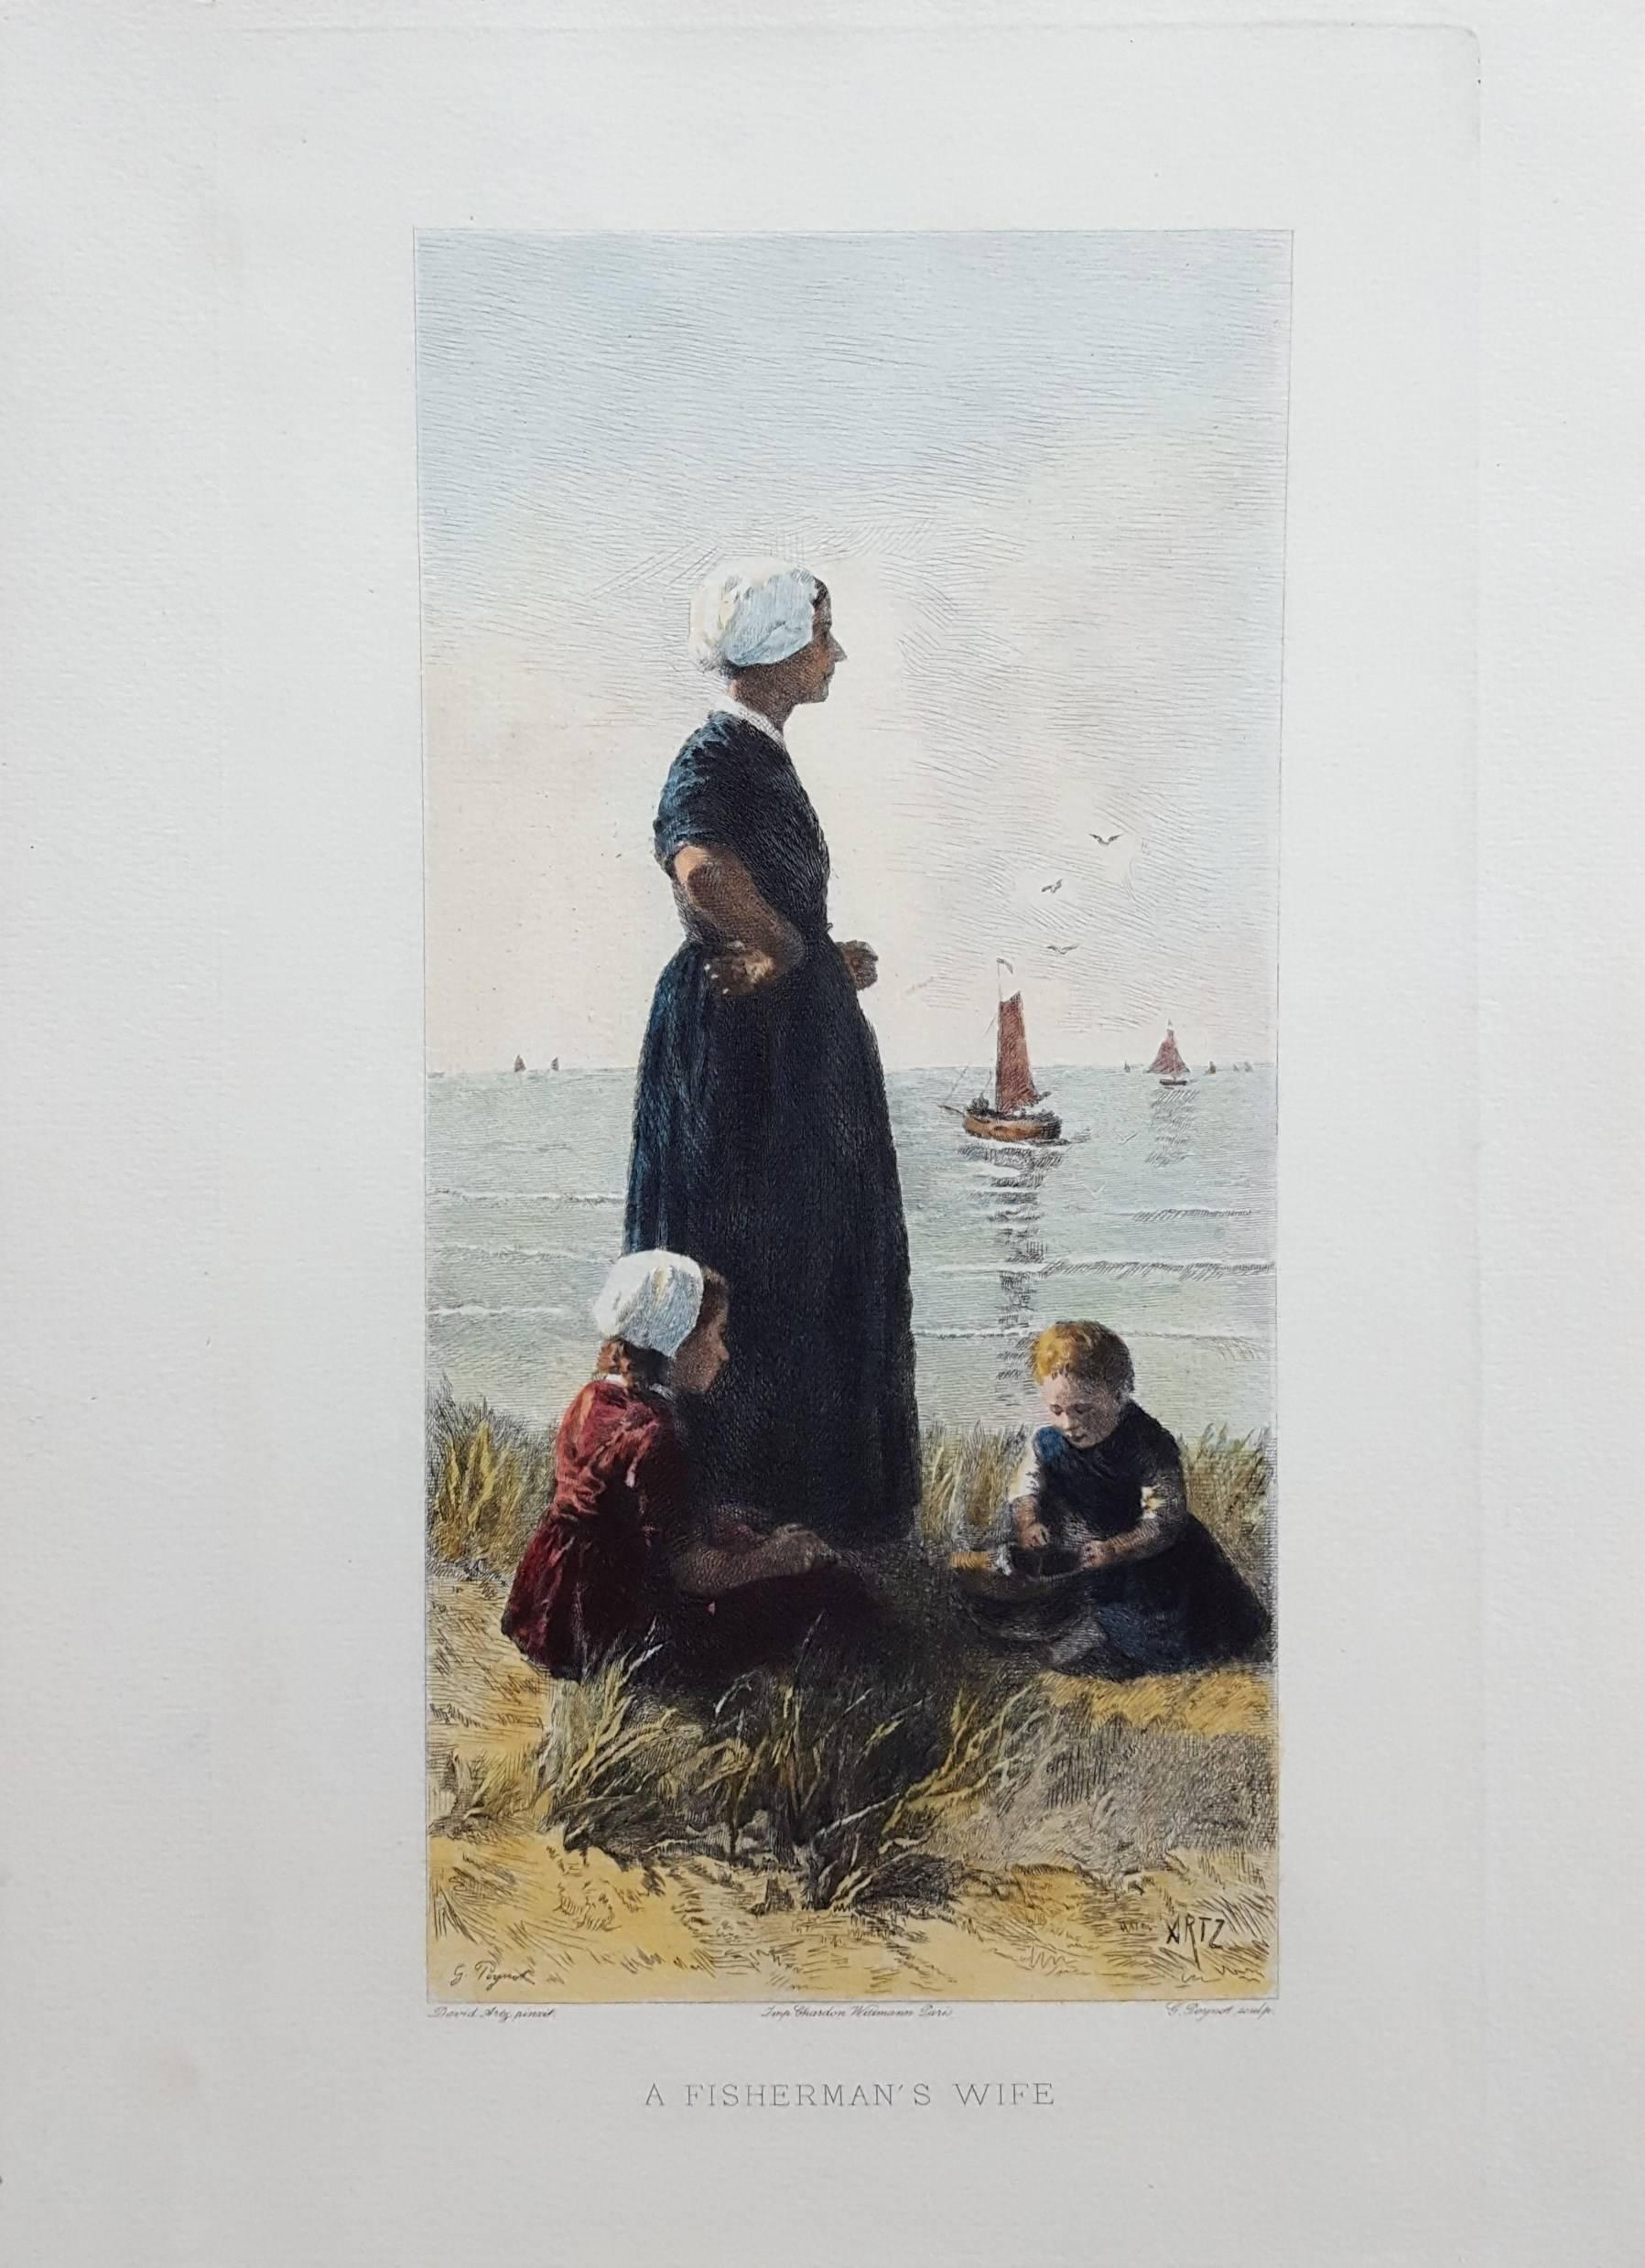 A Fisherman's Wife - Print by Artz, David Adolph Constant